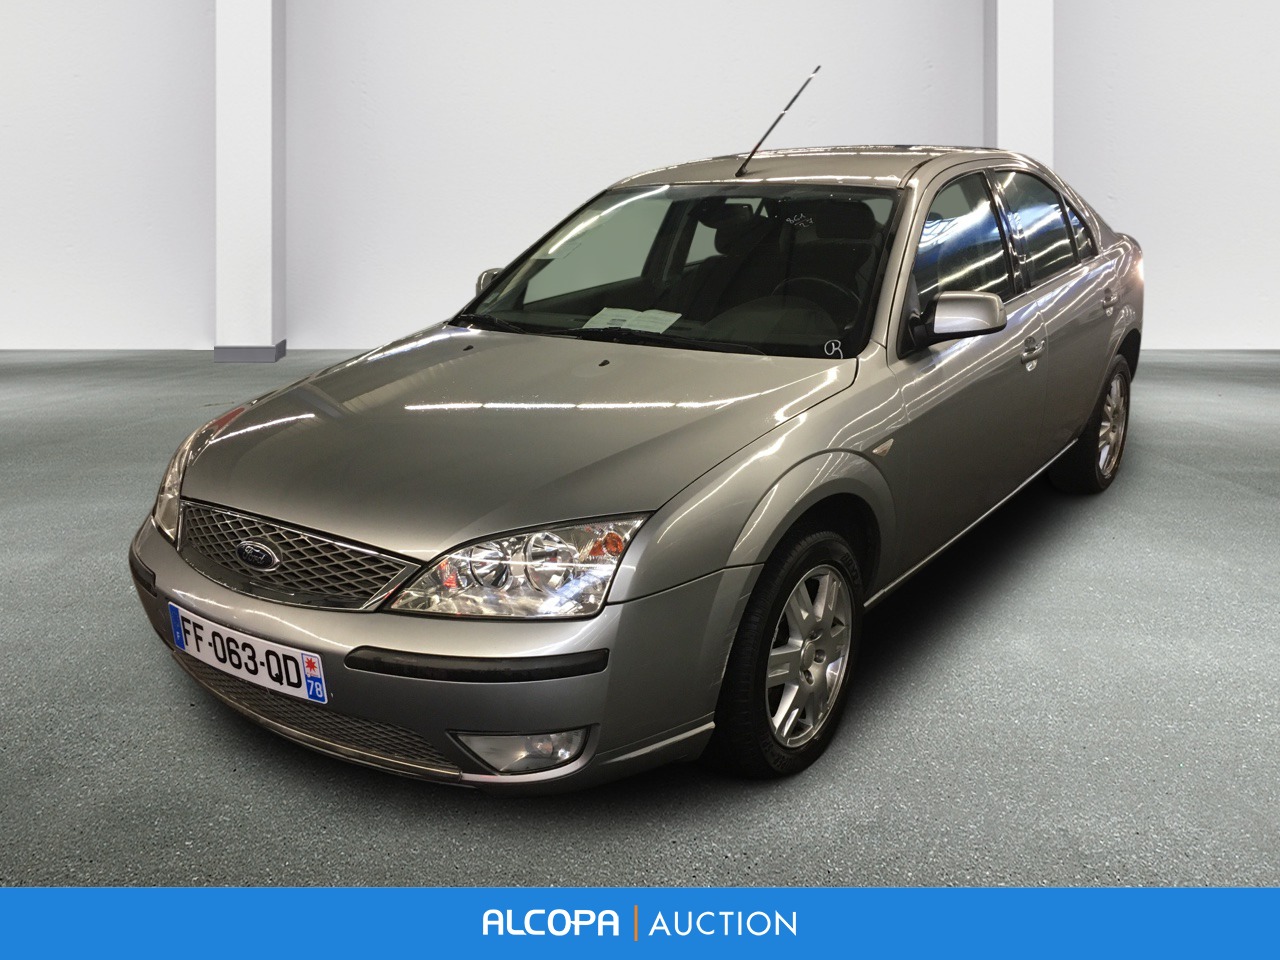 FORD MONDEO MONDEO 2.0 TDCI 115 Alcopa Auction